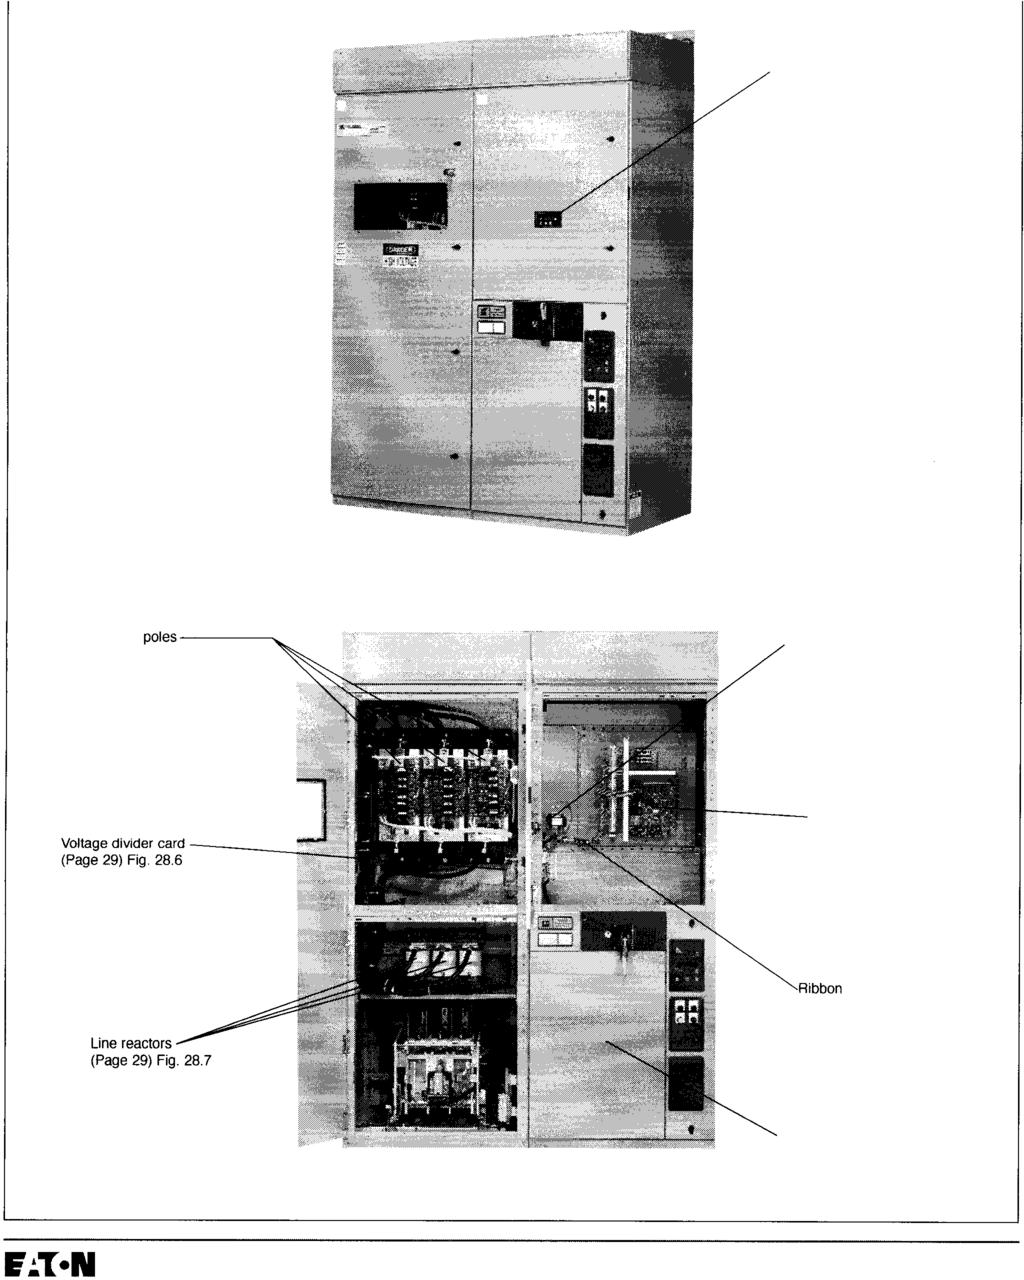 Renewal Parts Page 28 Effective: Marcil 2000 Cutler-Hammer Reduced Voltage Solid State (RVSS) Digital keypad display (Page 29) Fig. 28.1 Power poles----.,.